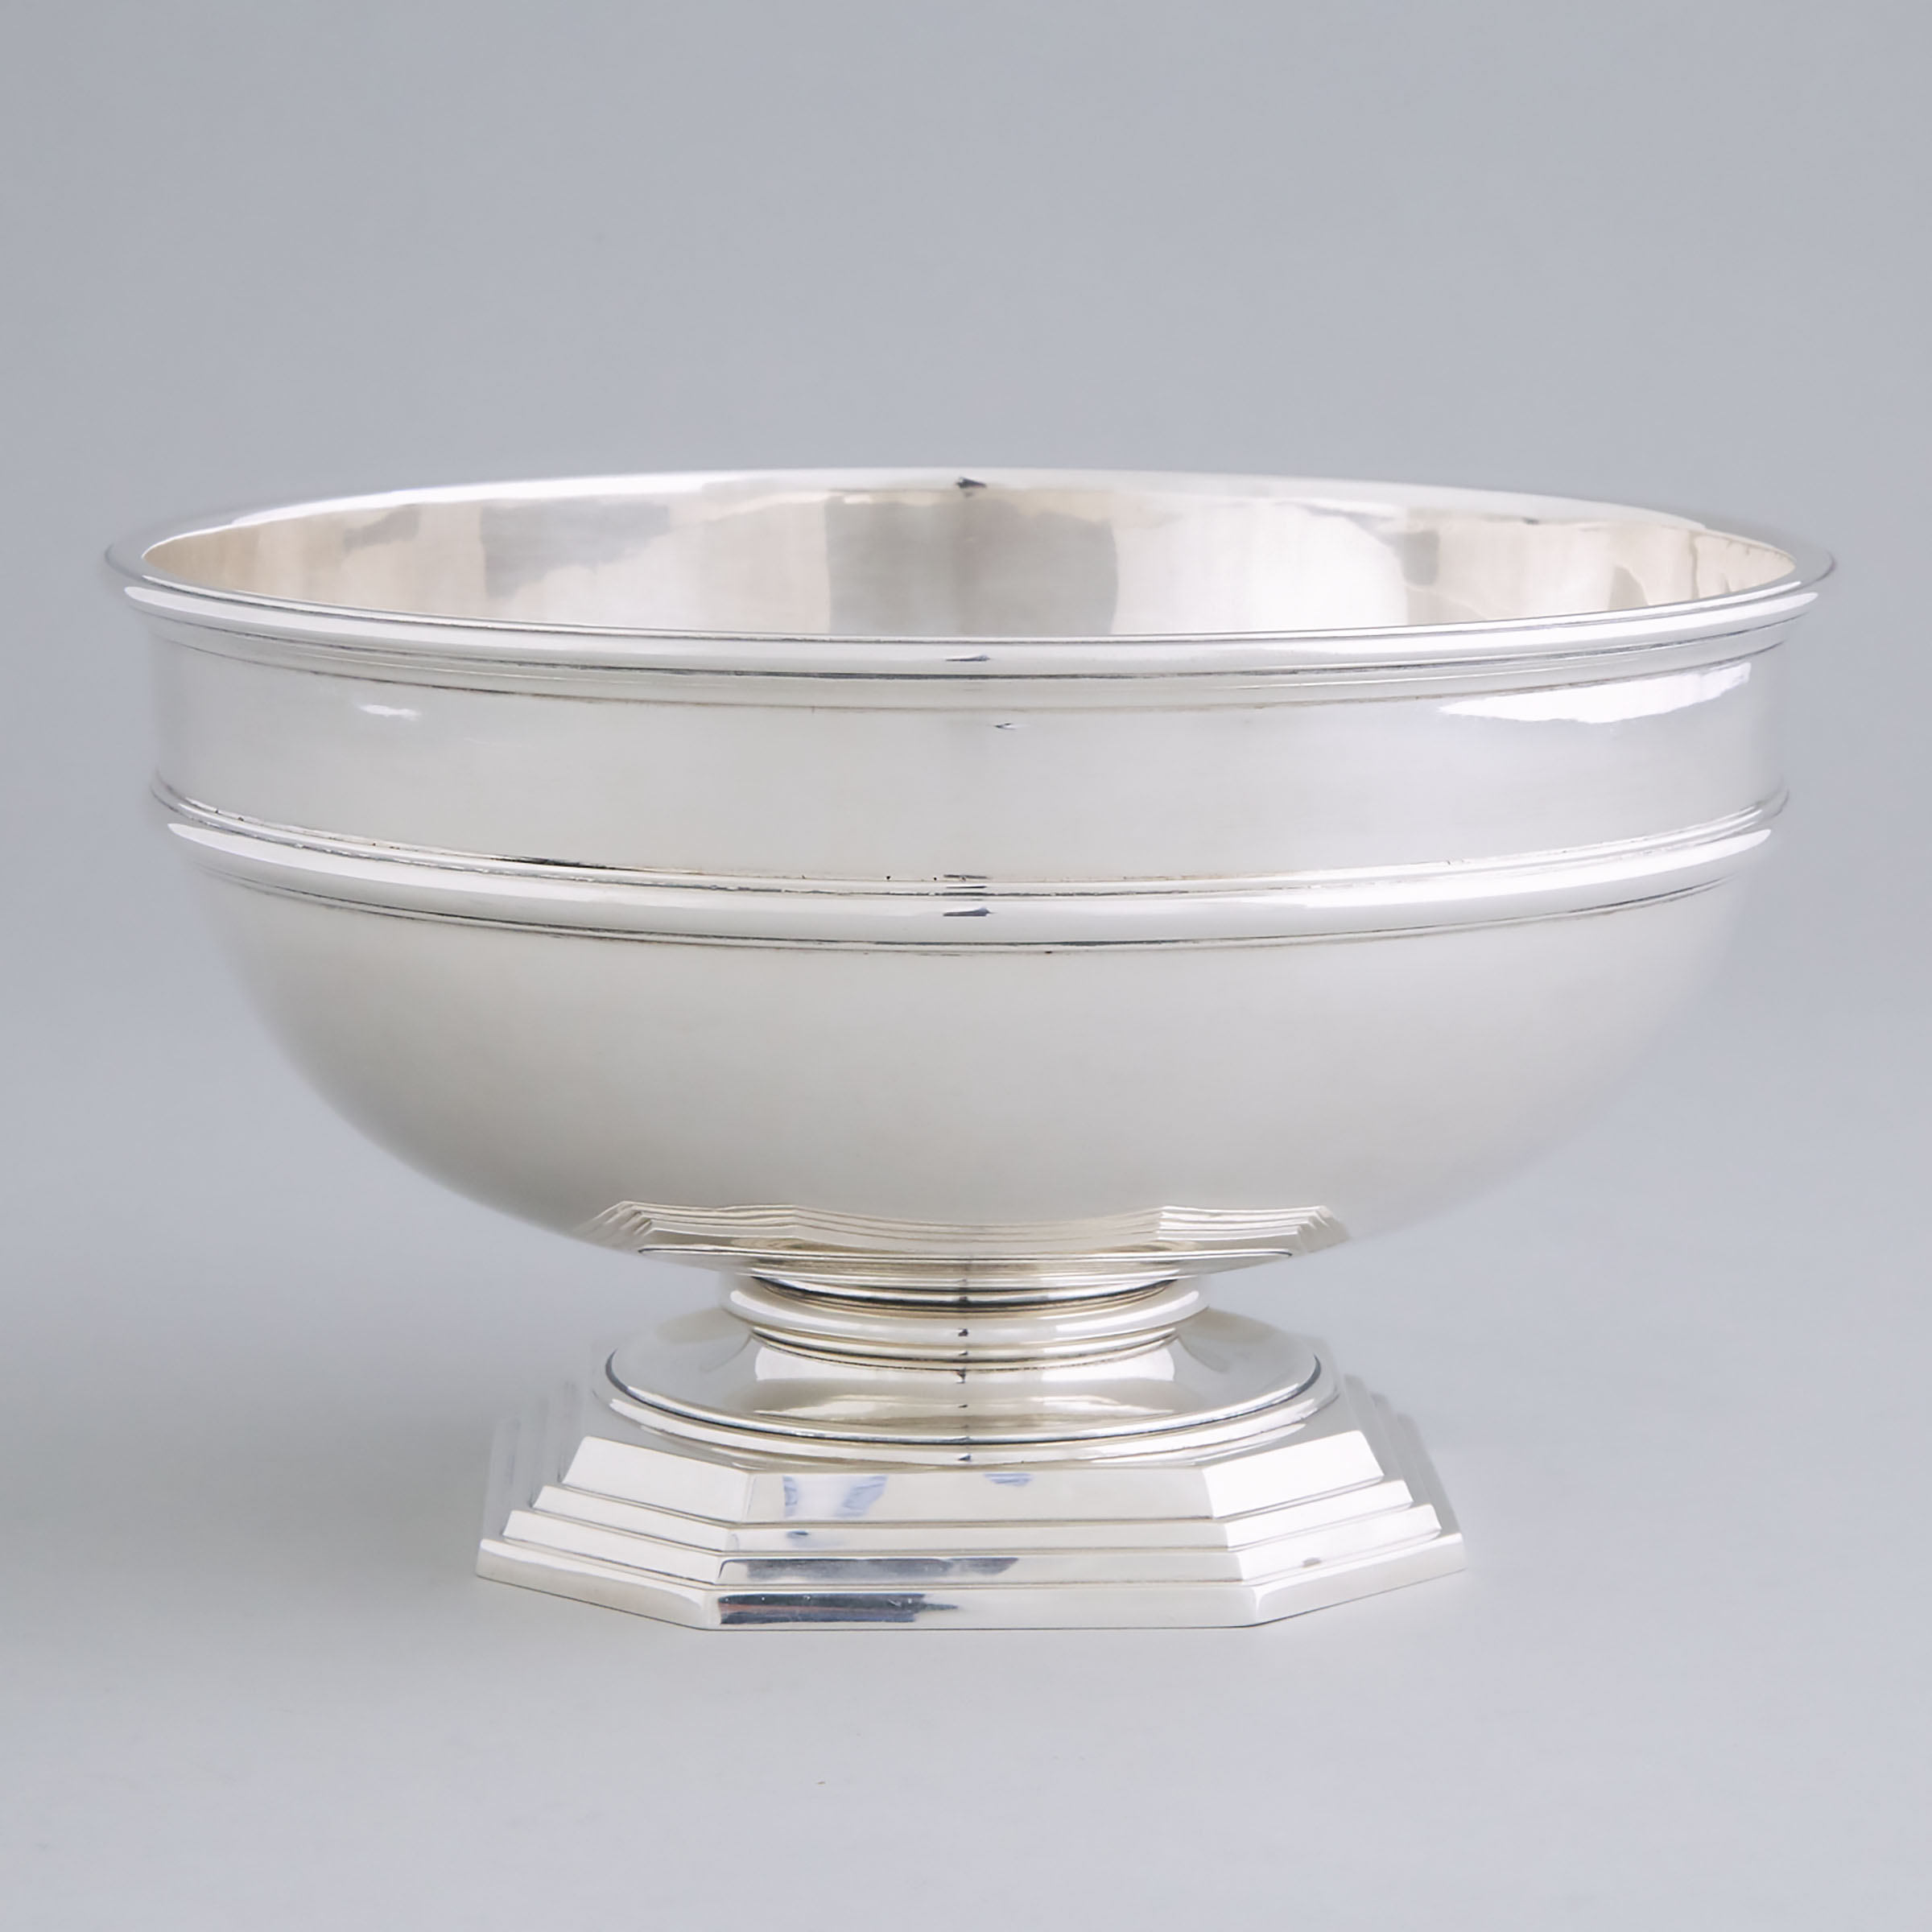 Canadian Silver Octagonal-Footed Bowl, Henry Birks & Sons, Montreal, Que., 1934